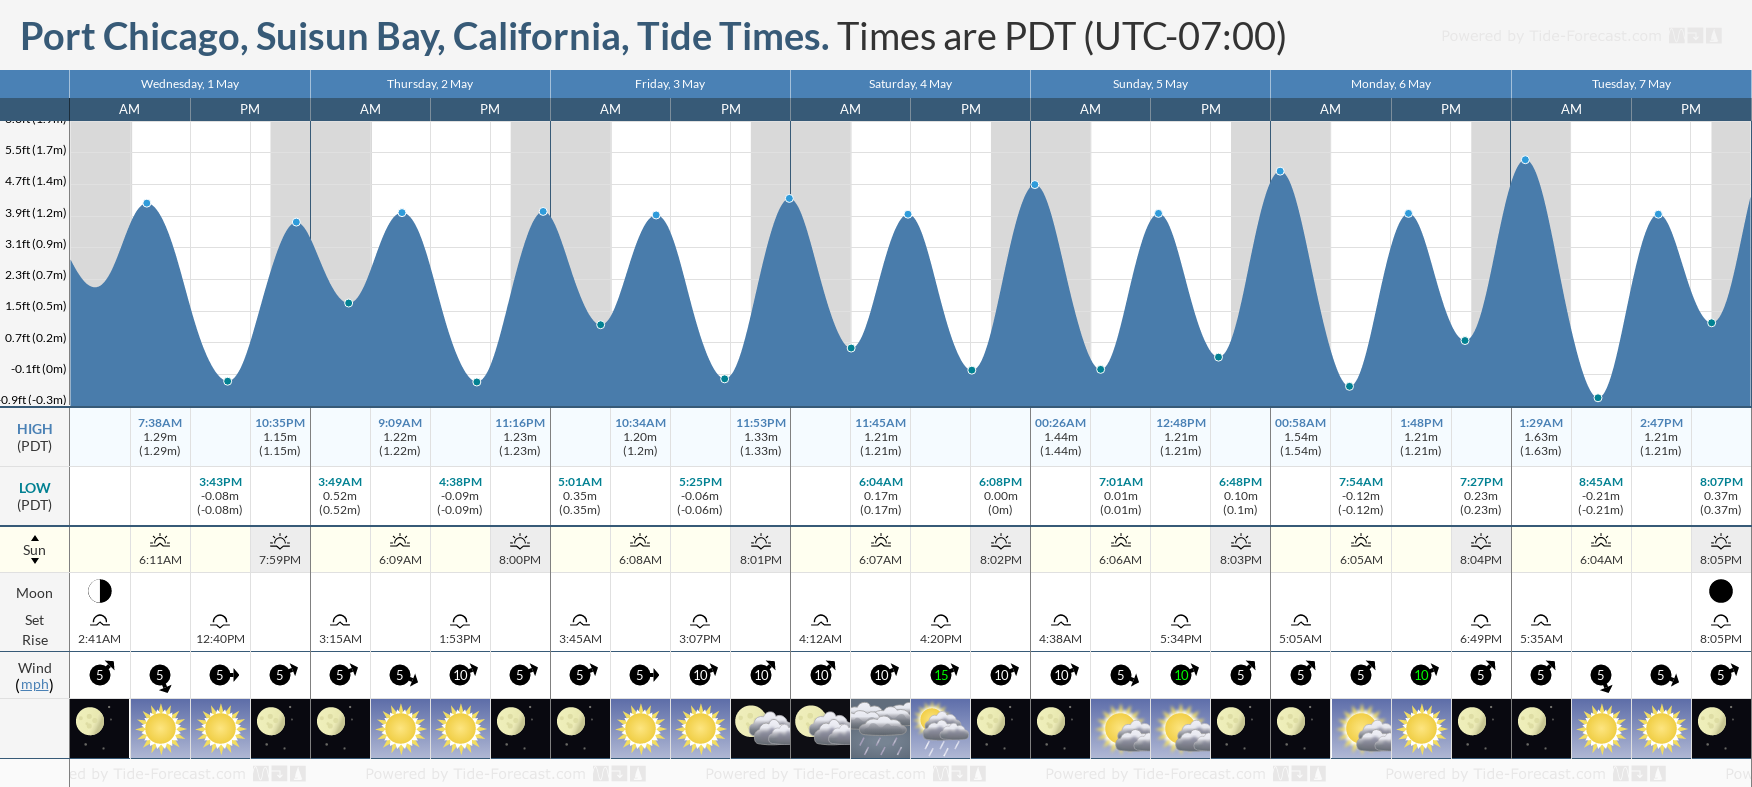 Port Chicago, Suisun Bay, California Tide Chart including high and low tide tide times for the next 7 days